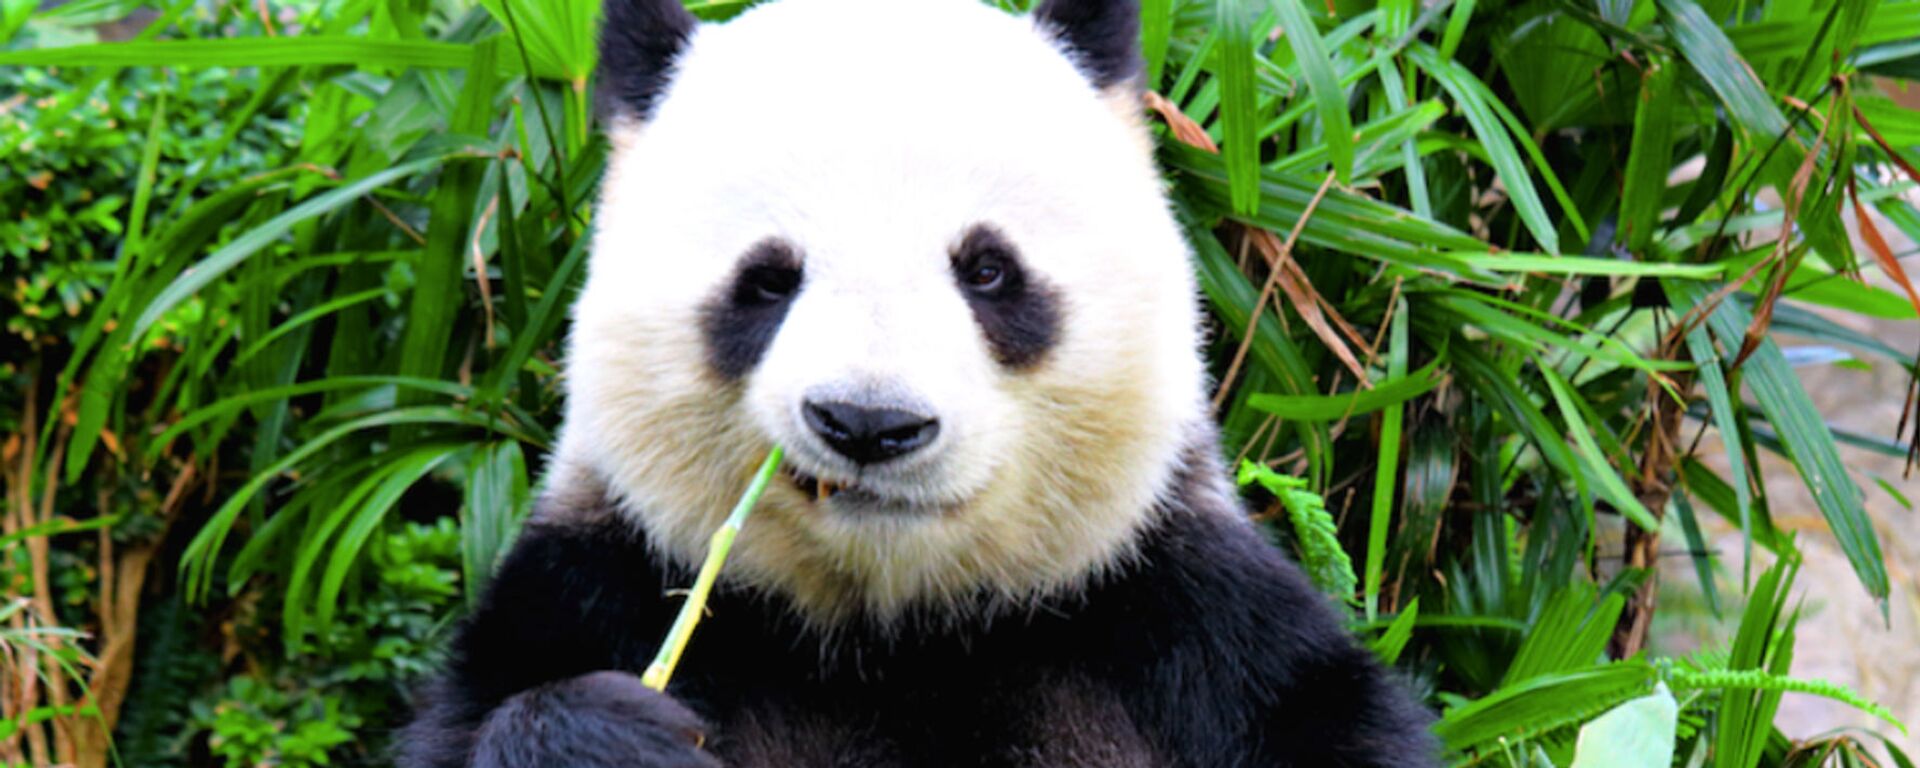 Canadian Zoo Sends Pandas Home to China After Pandemic Frustrates Bamboo Imports - Sputnik International, 1920, 08.12.2020